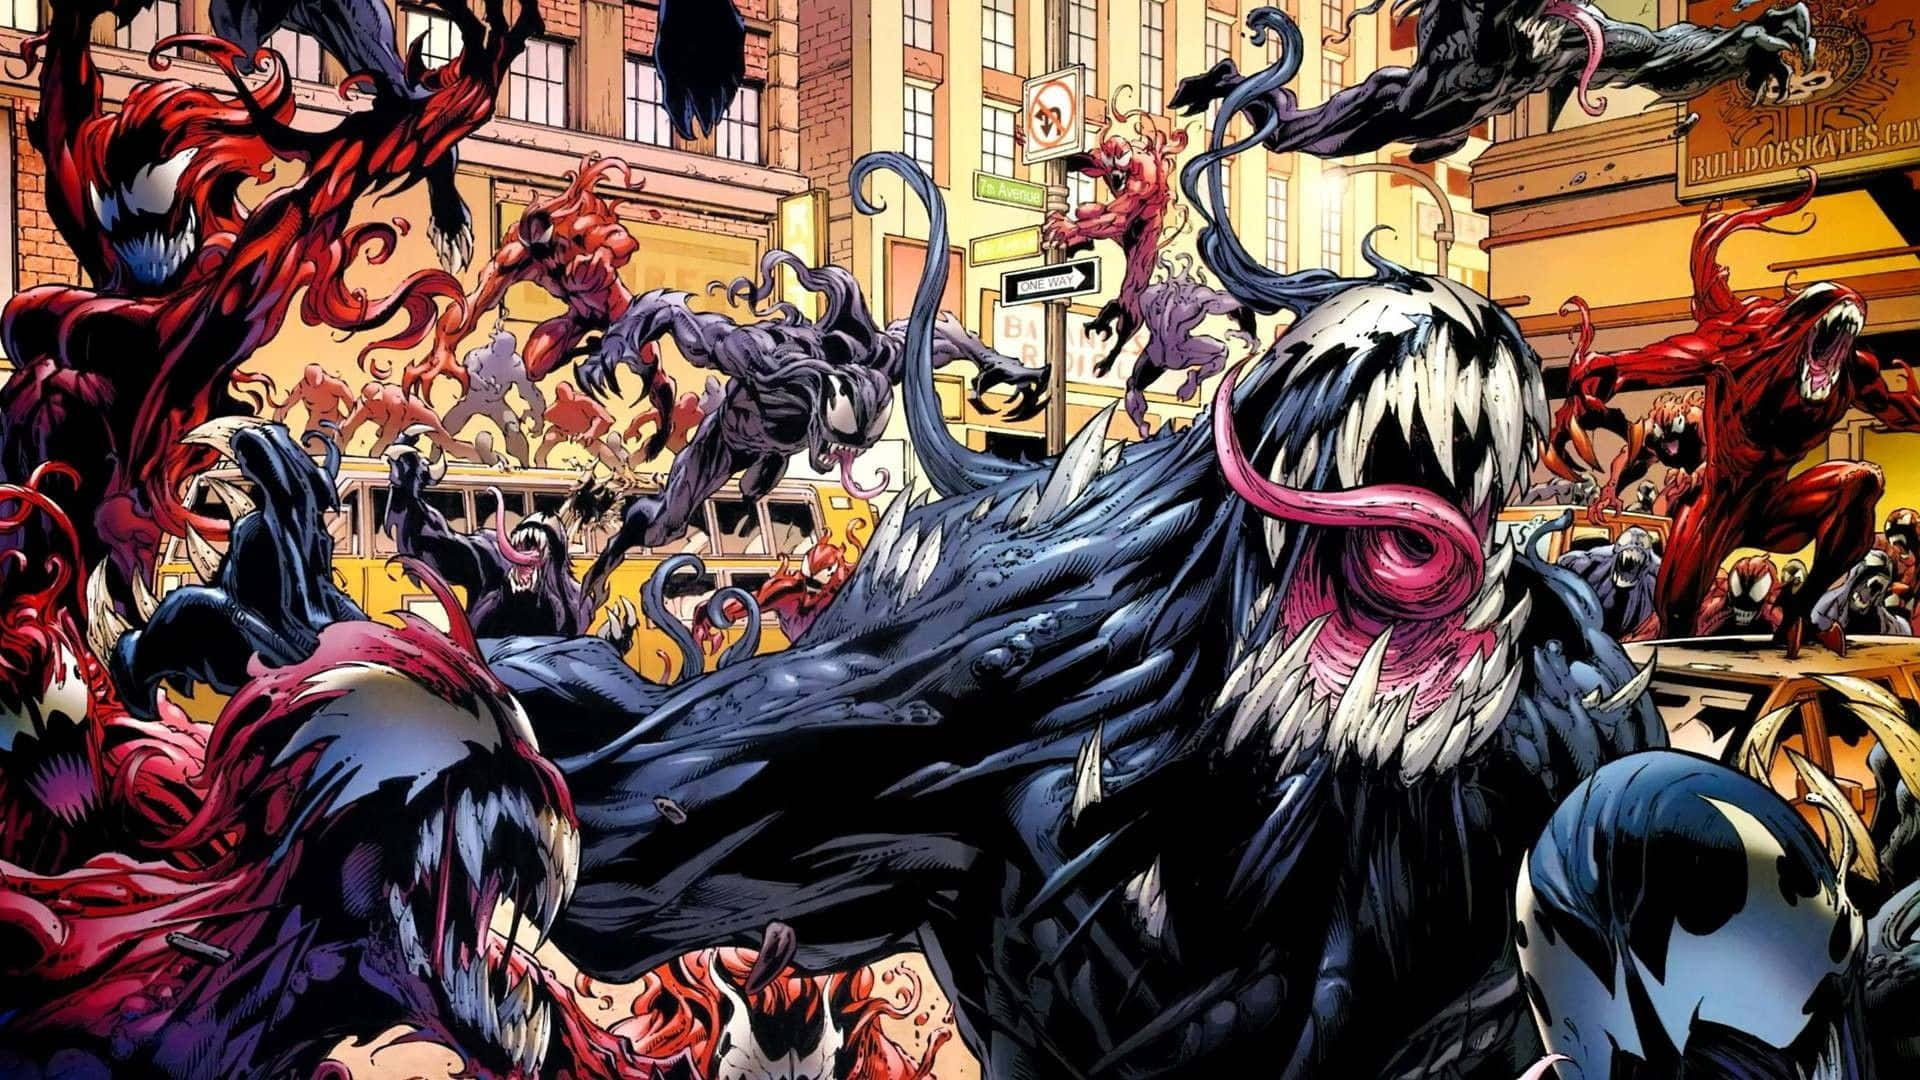 Venom And His Friends Are Fighting In A City